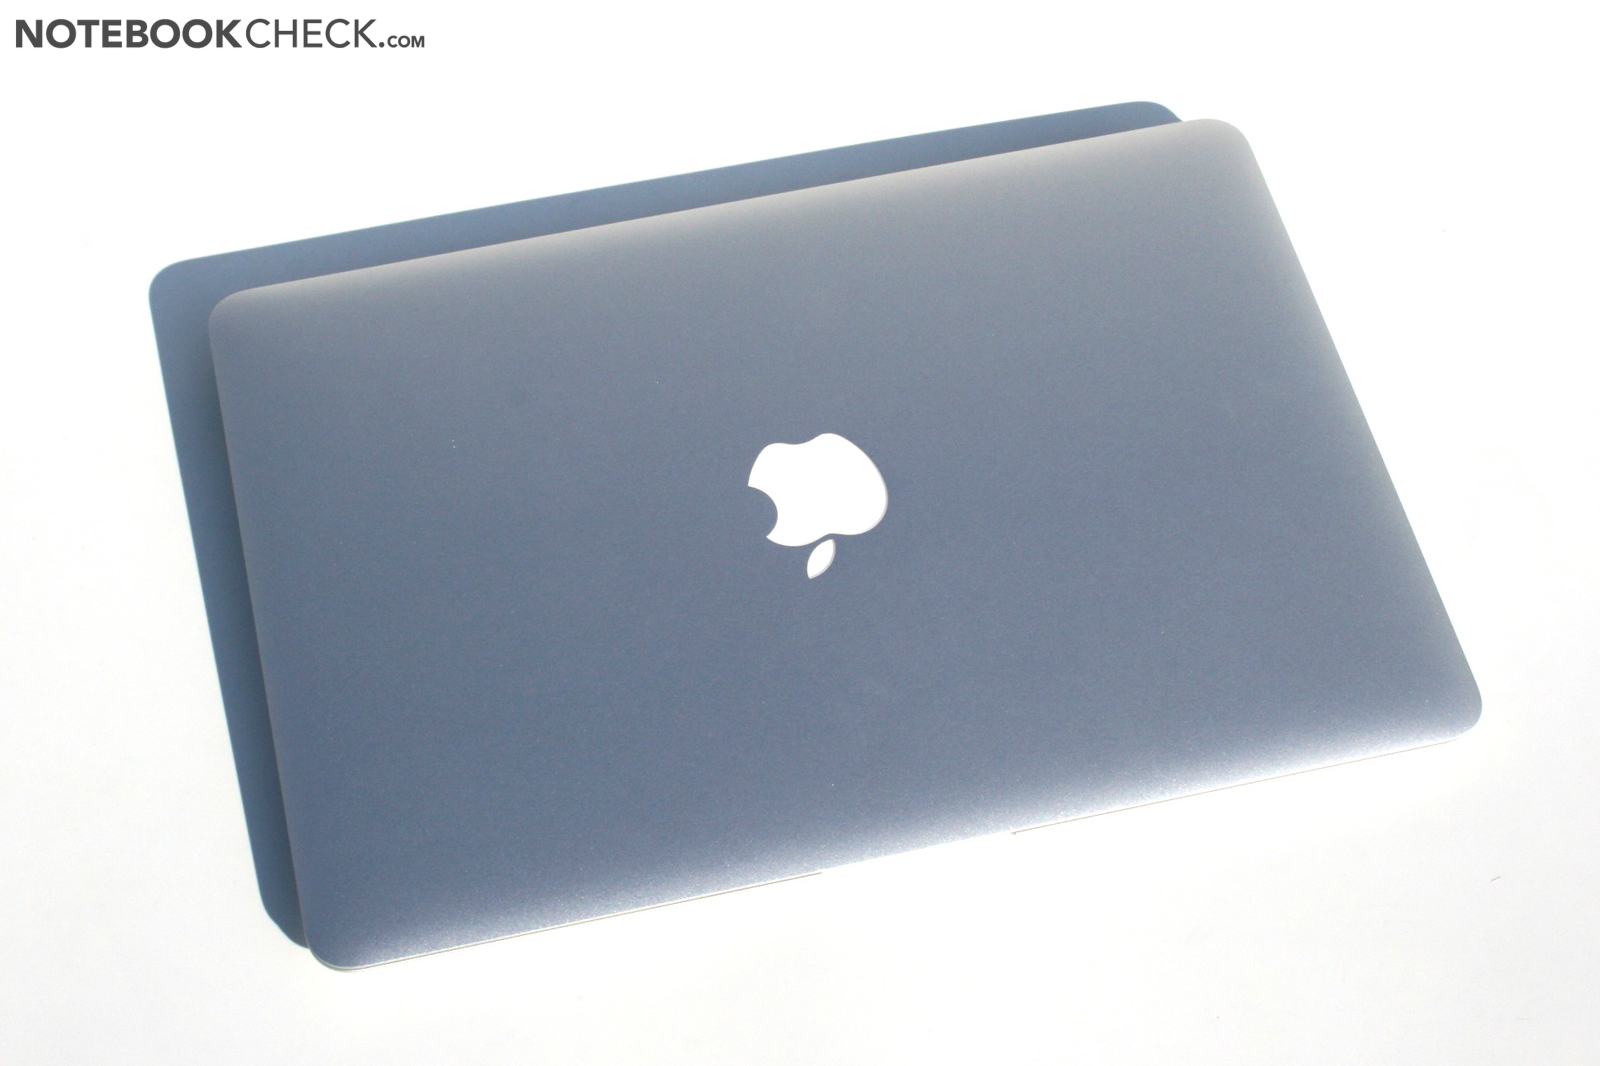 Review Apple MacBook Air 13 Mid 2011 (1.7 GHz, 256 GB SSD 